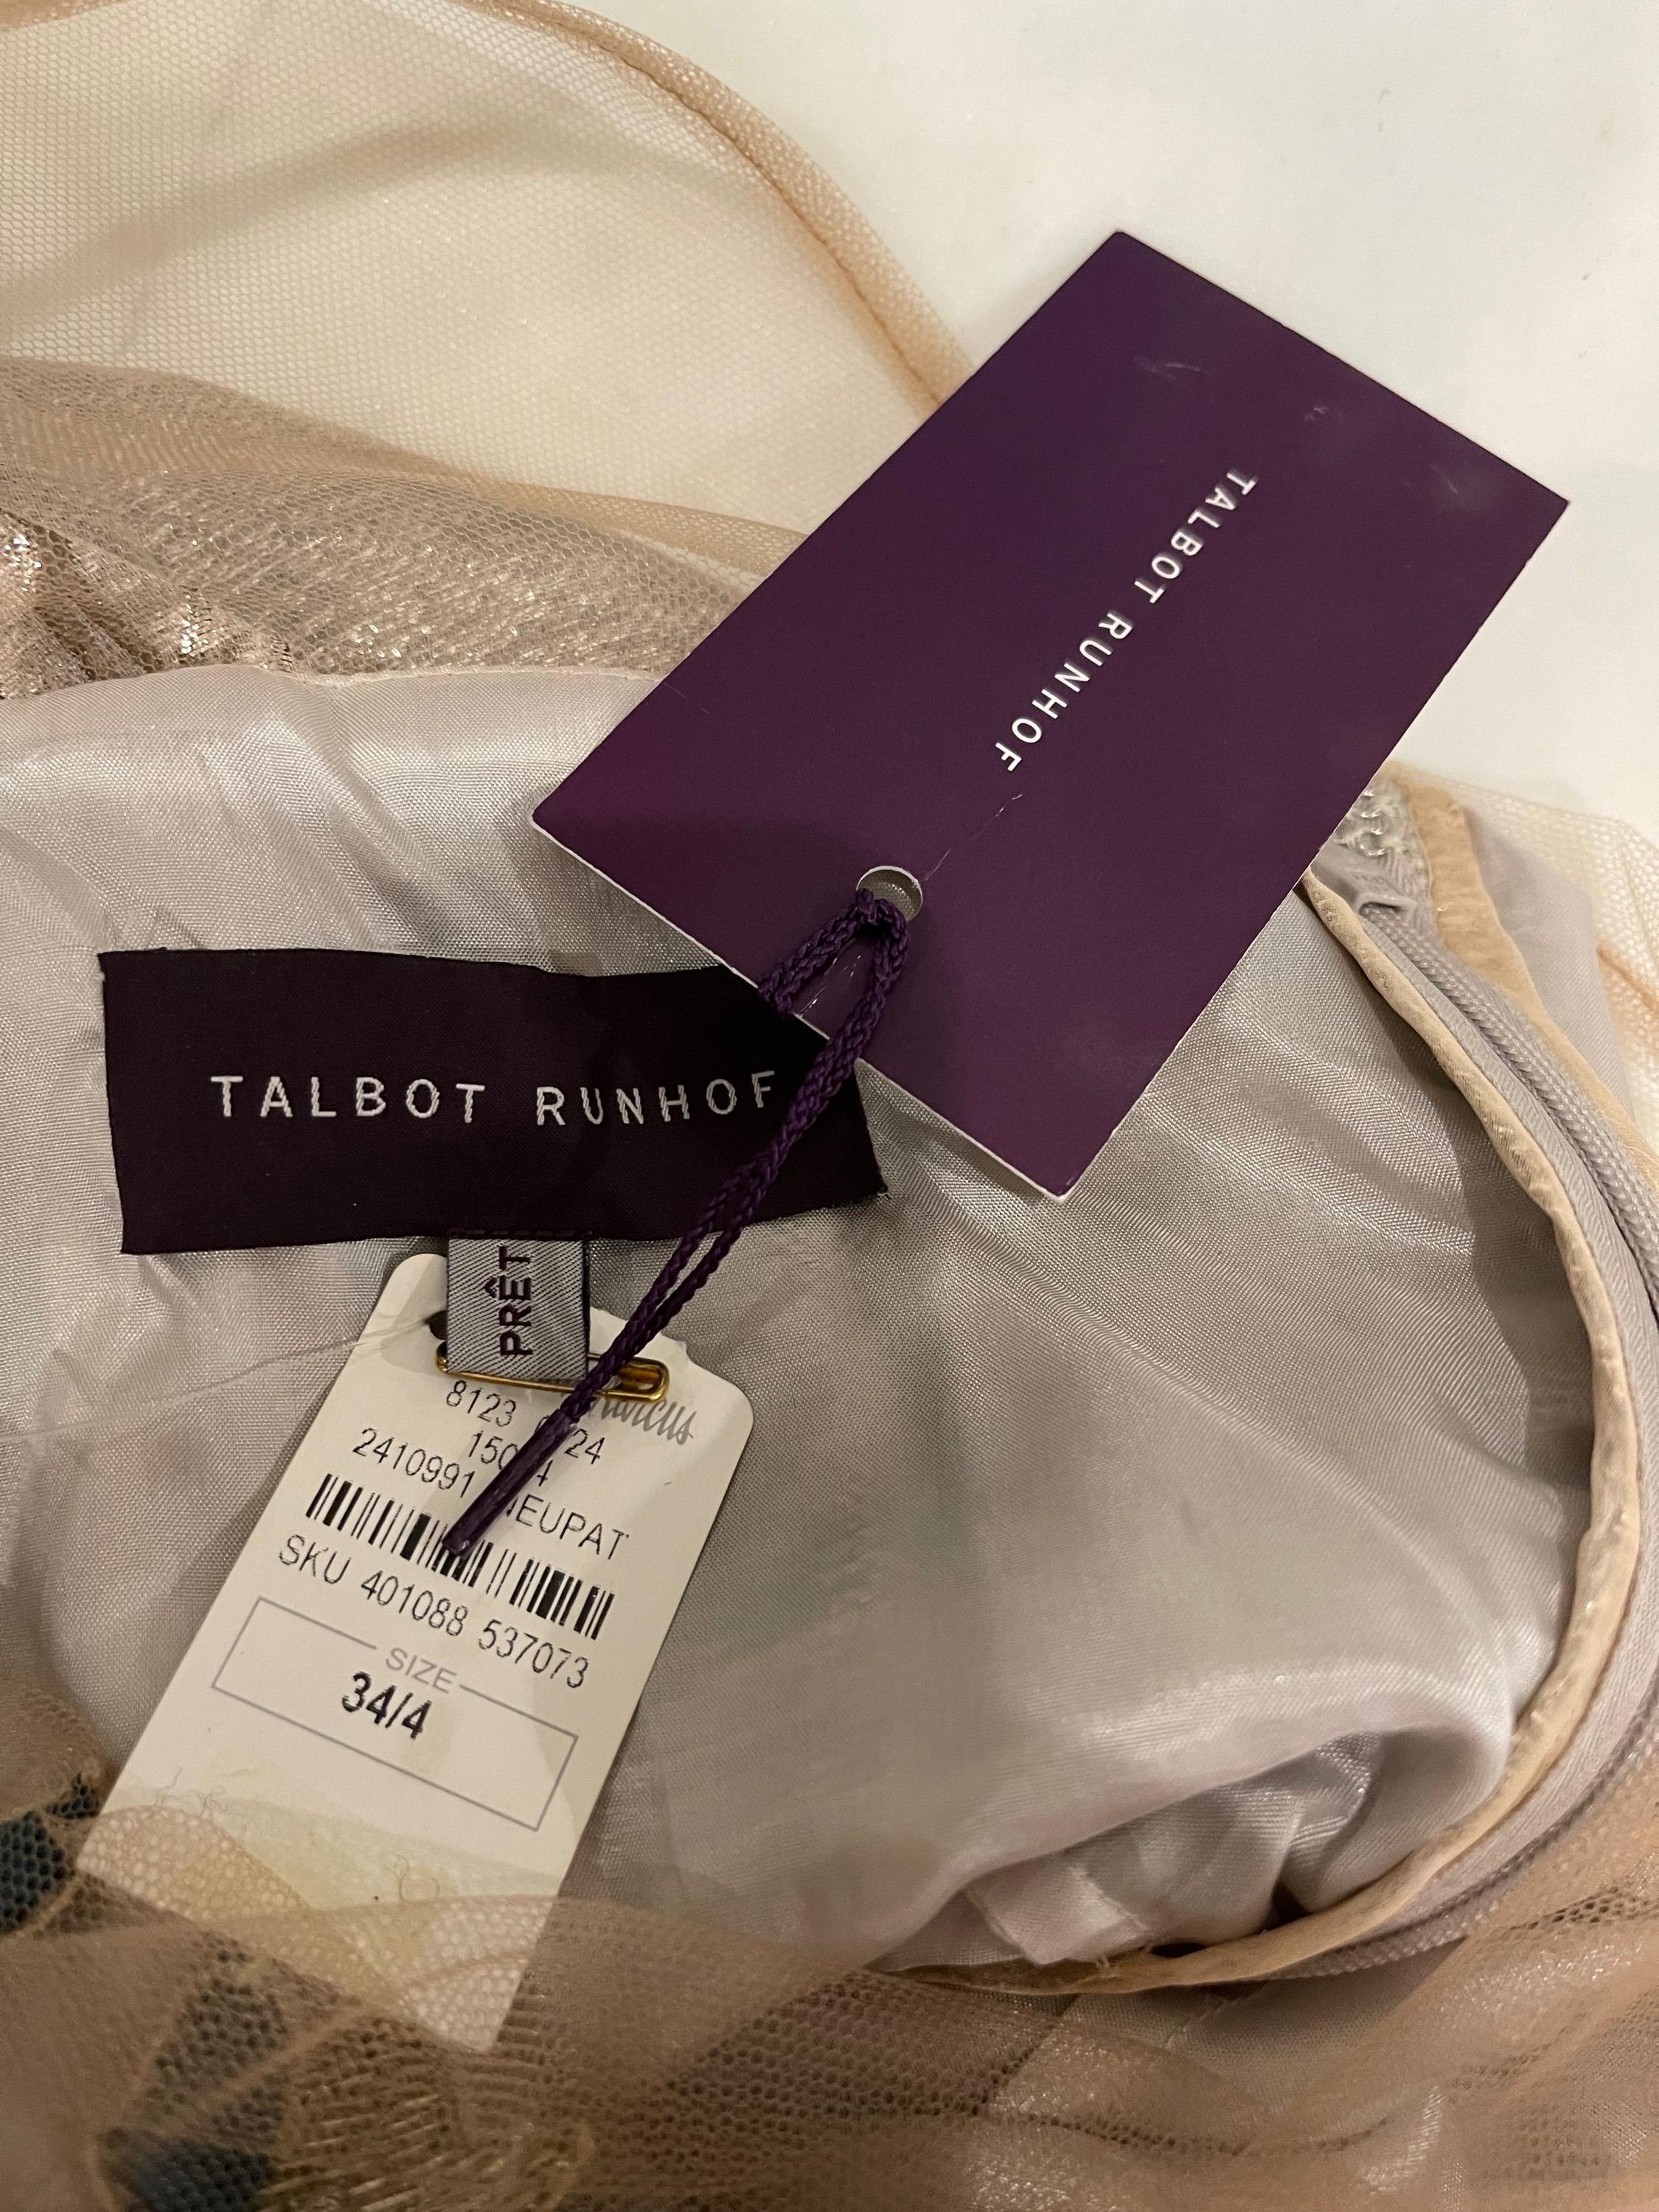 NWT TALBOT RUNHOF gold silk beaded and embroidered silk fit n’ flare dress ! Brand new, with original Neiman Marcus tags still attached. Tailored bodice features hundreds of hand-sewn gold beads with teal blue embroidery. Nude illusion mesh above